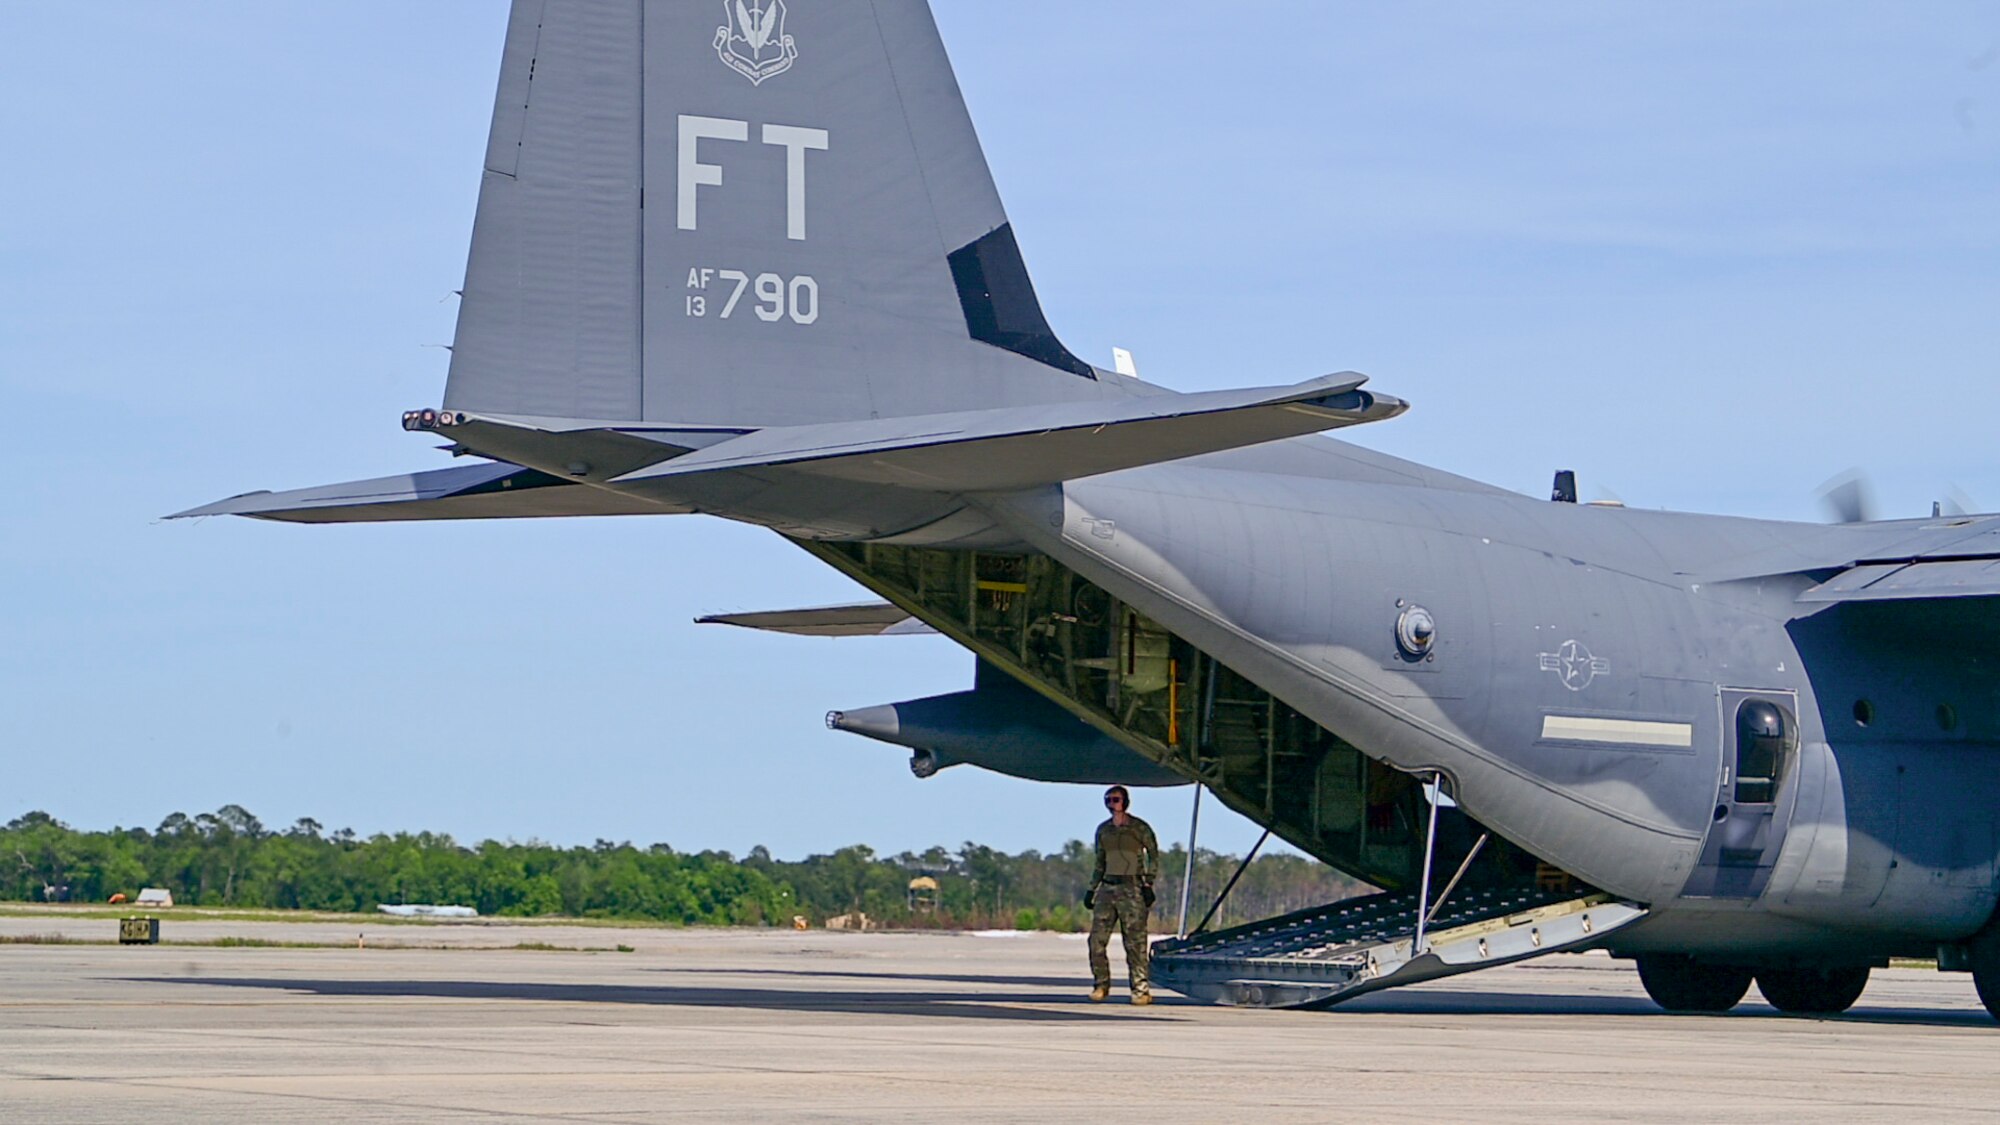 A U.S Air Force loadmaster assigned to the 71st Rescue Squadron prepares to load personnel and cargo onto an HC-130J Combat King II  during Exercise Ready Tiger 24-1 at Moody Air Force Base, Georgia, April 8, 2024. Loadmasters are responsible for supervising the loading and unloading of cargo, vehicles and people on a variety of aircraft. During Ready Tiger 24-1, exercise inspectors will assess the 23rd Wing's proficiency in employing decentralized command and control to fulfill air tasking orders across geographically dispersed areas amid communication challenges, integrating Agile Combat Employment principles such as integrated combat turns, forward aerial refueling points, multi-capable Airmen, and combat search and rescue capabilities. (U.S. Air Force photo by 2nd Lt. Benjamin Williams)